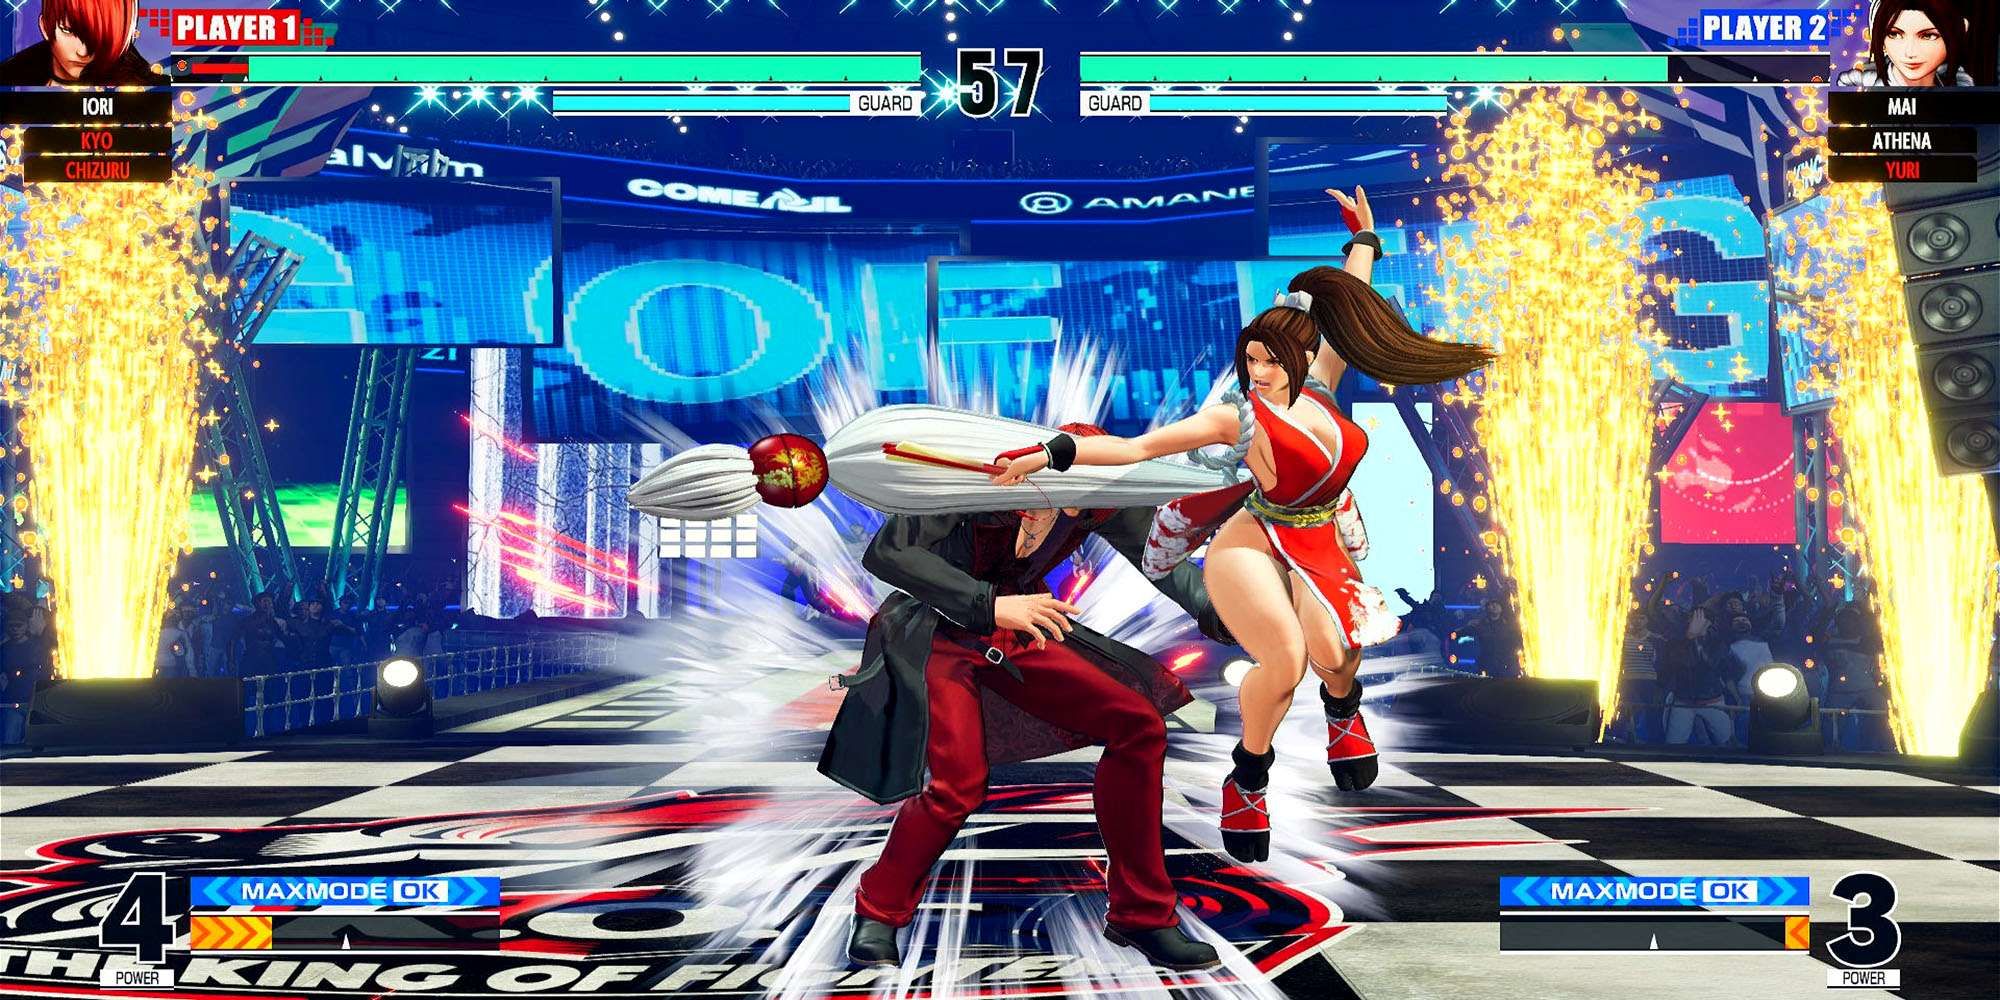 Mai hits Iori with a shatter strike at the Concert Hall in The King Of Fighters 15.